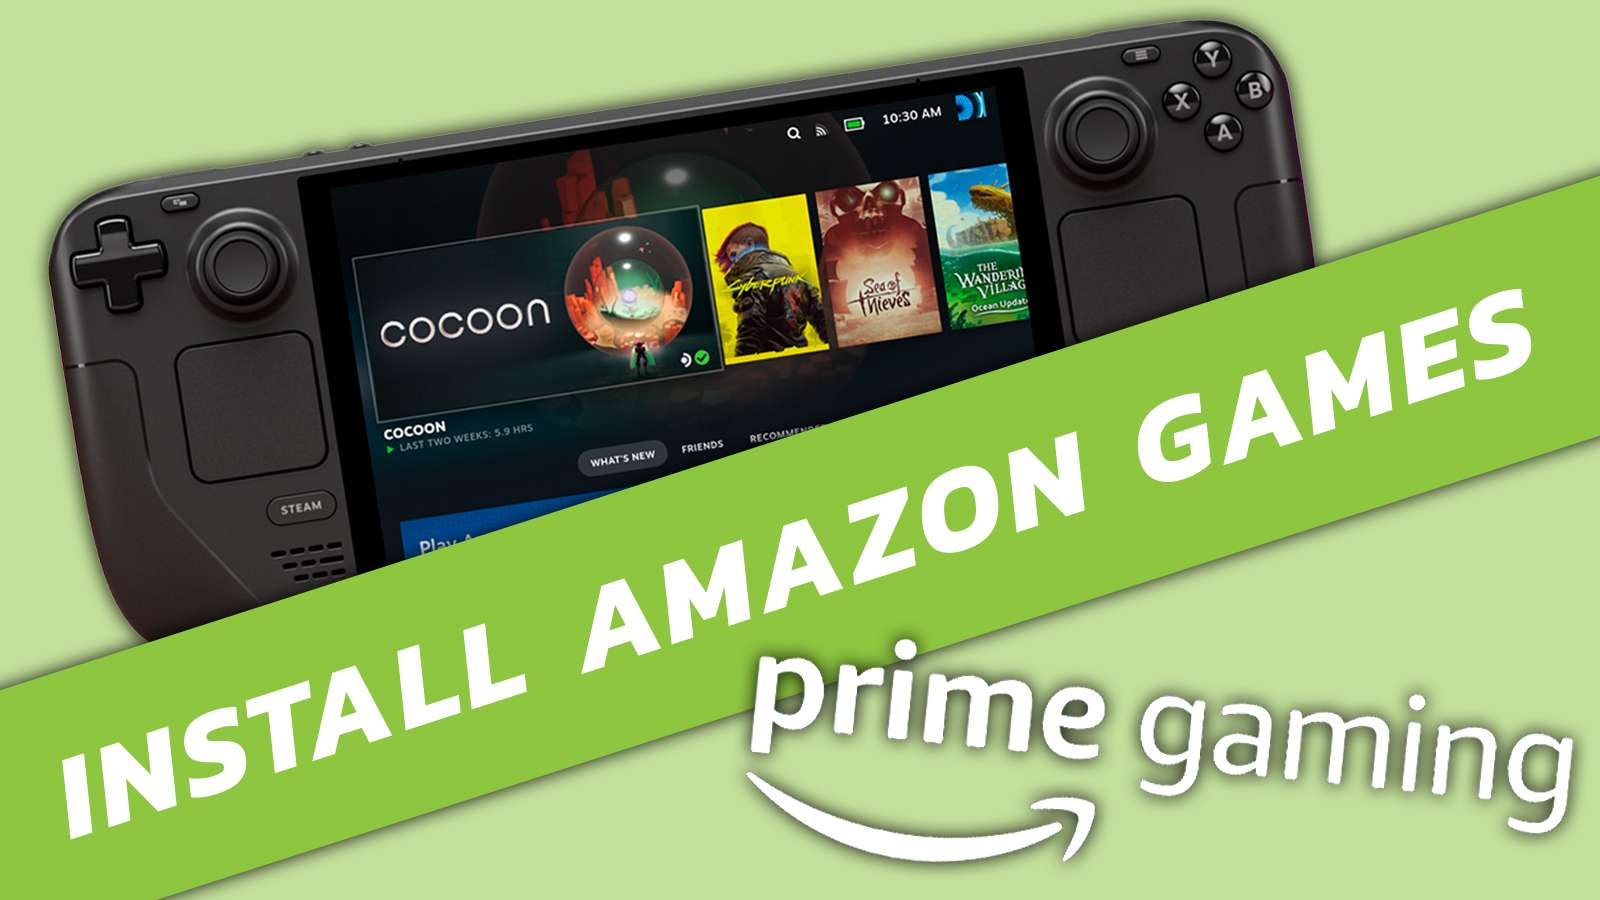 install amazon prime gaming games on steam deck